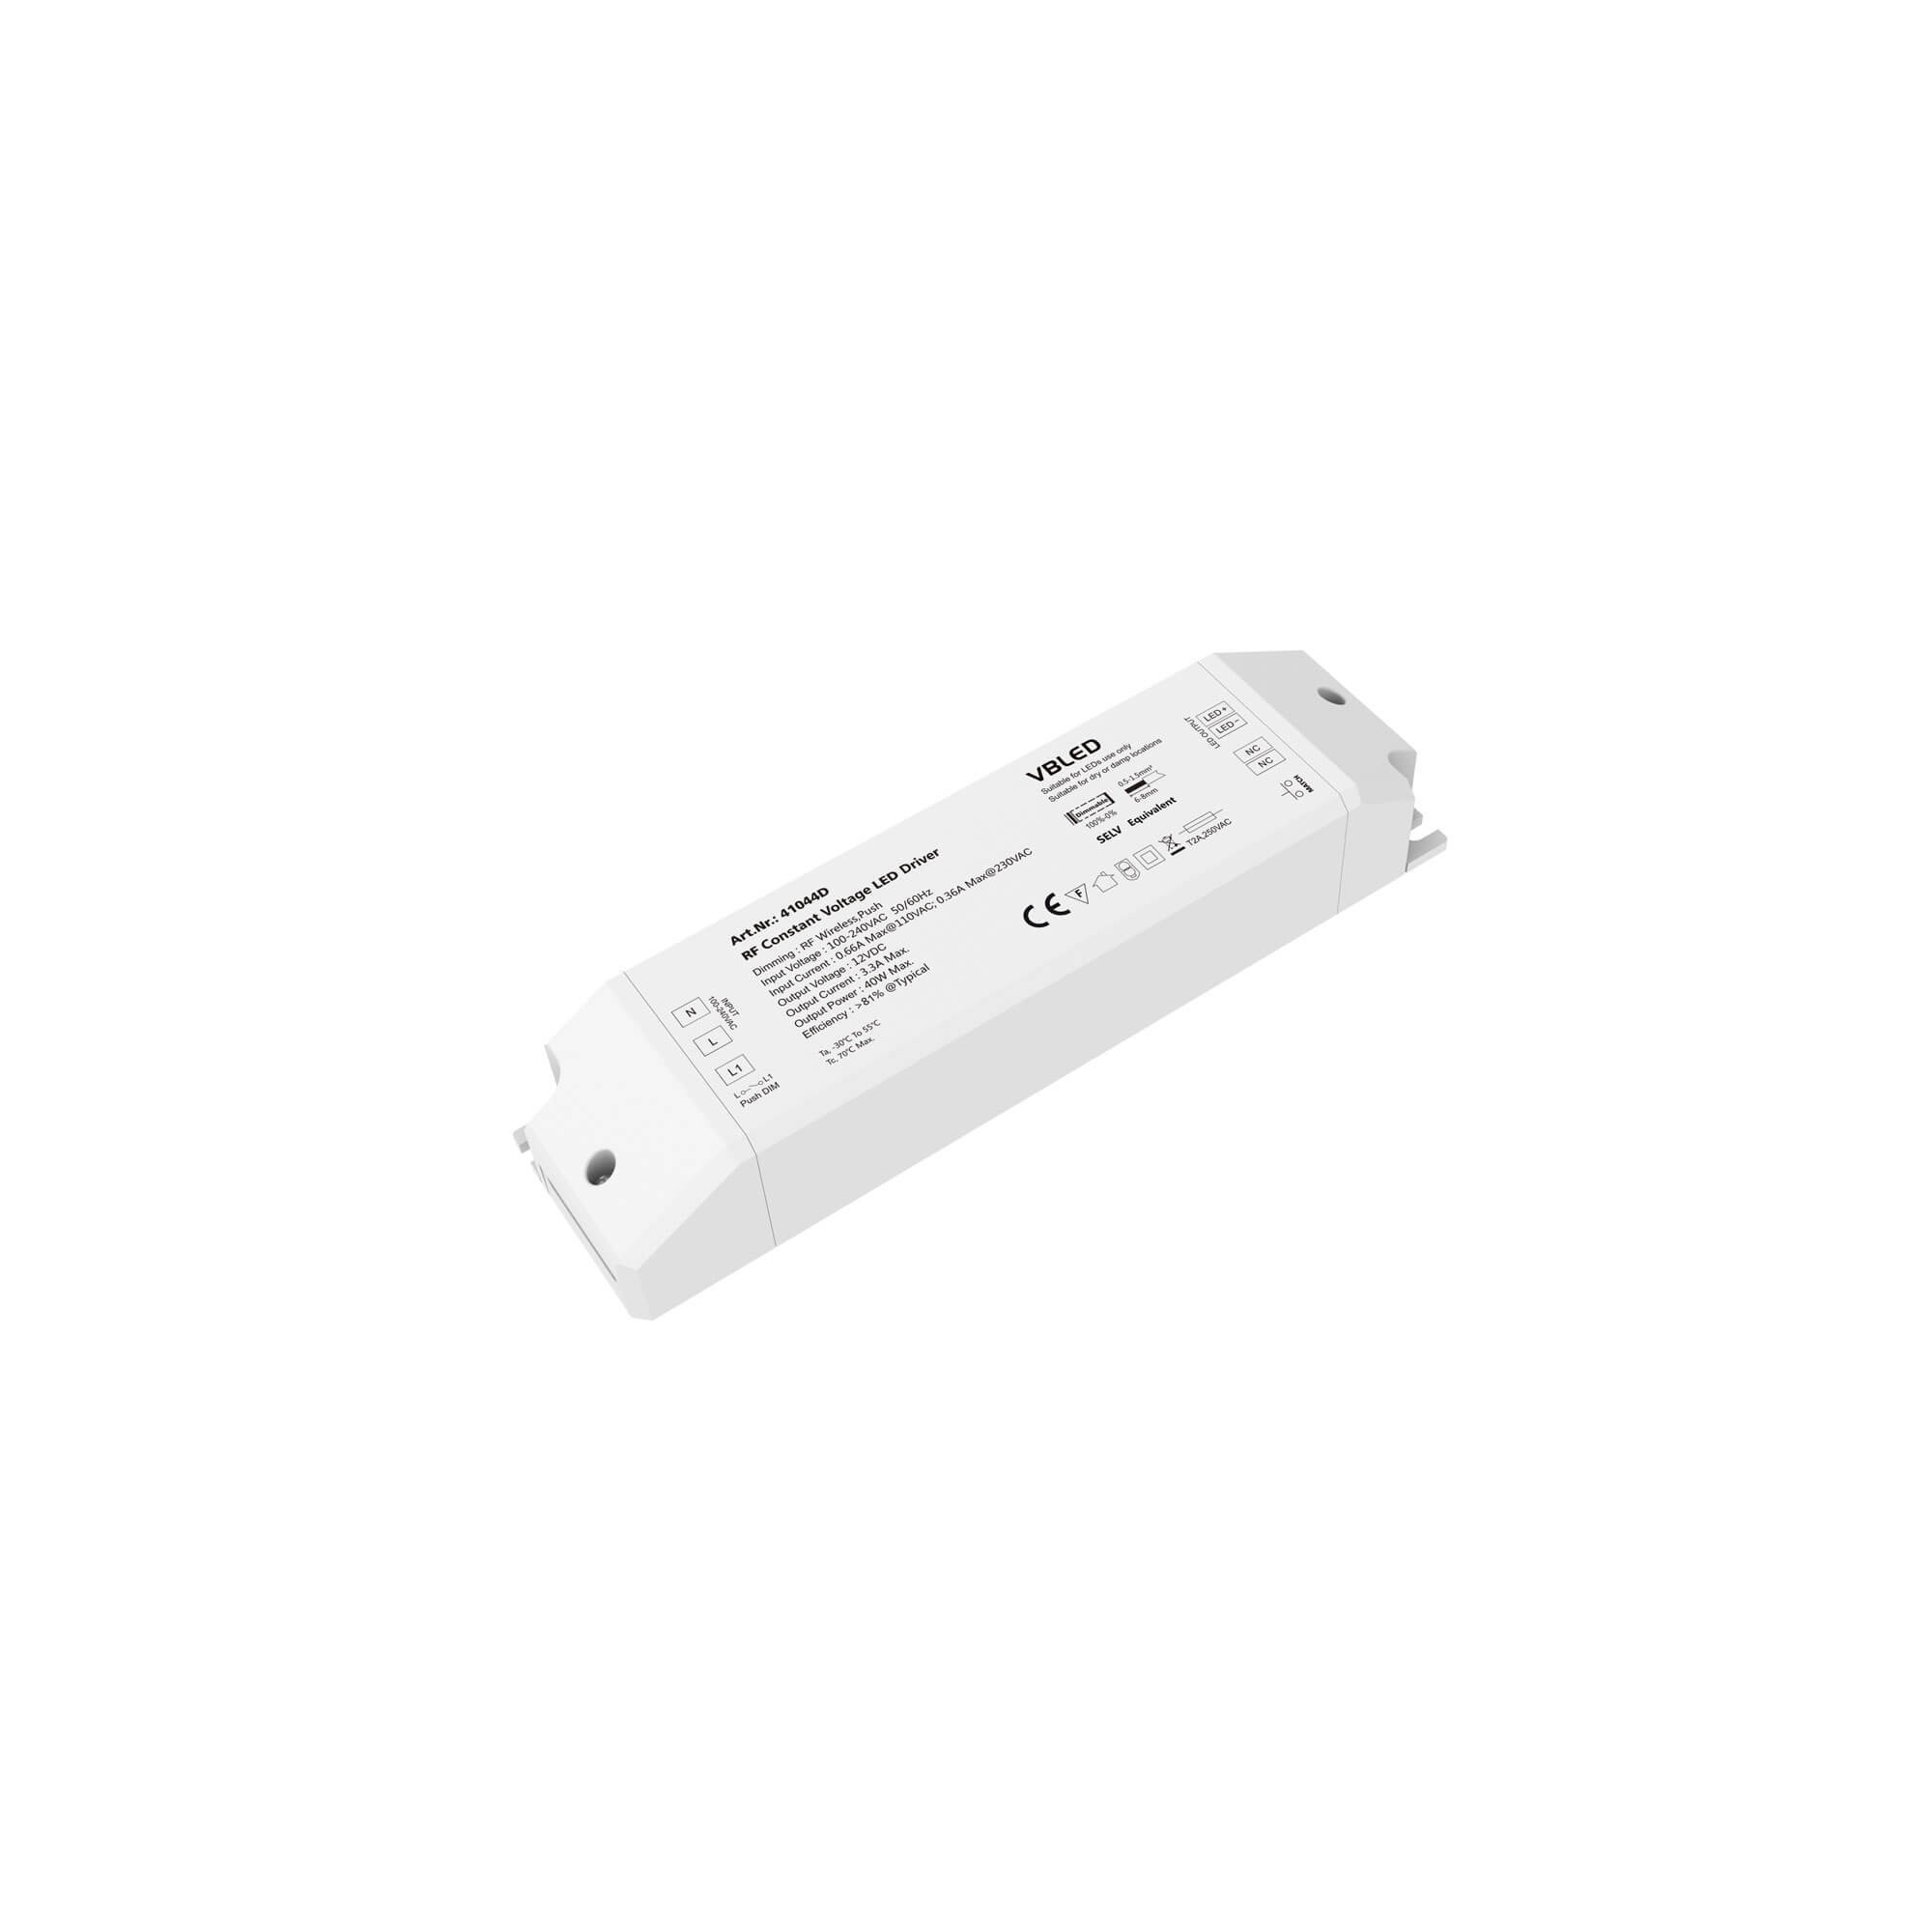 "INATUS" Funk LED Netzteil Konstantspannung / 12V DC / 40W